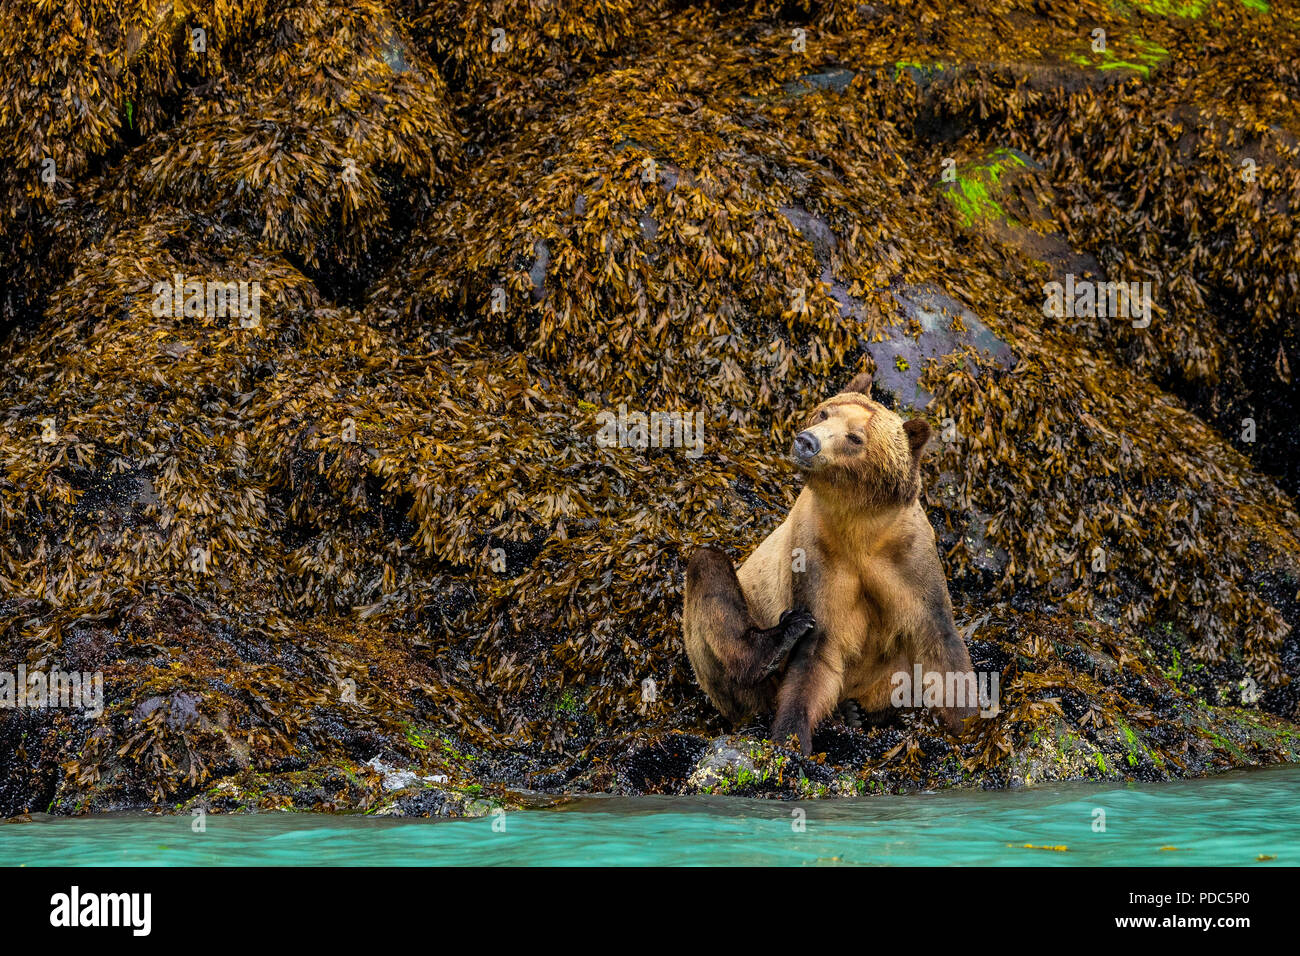 Grizzly bear sitting and scratching along the low tideline in Knight Inlet, First Nations Territory, Great Bear Rainforest, British Columbia, Canada. Stock Photo